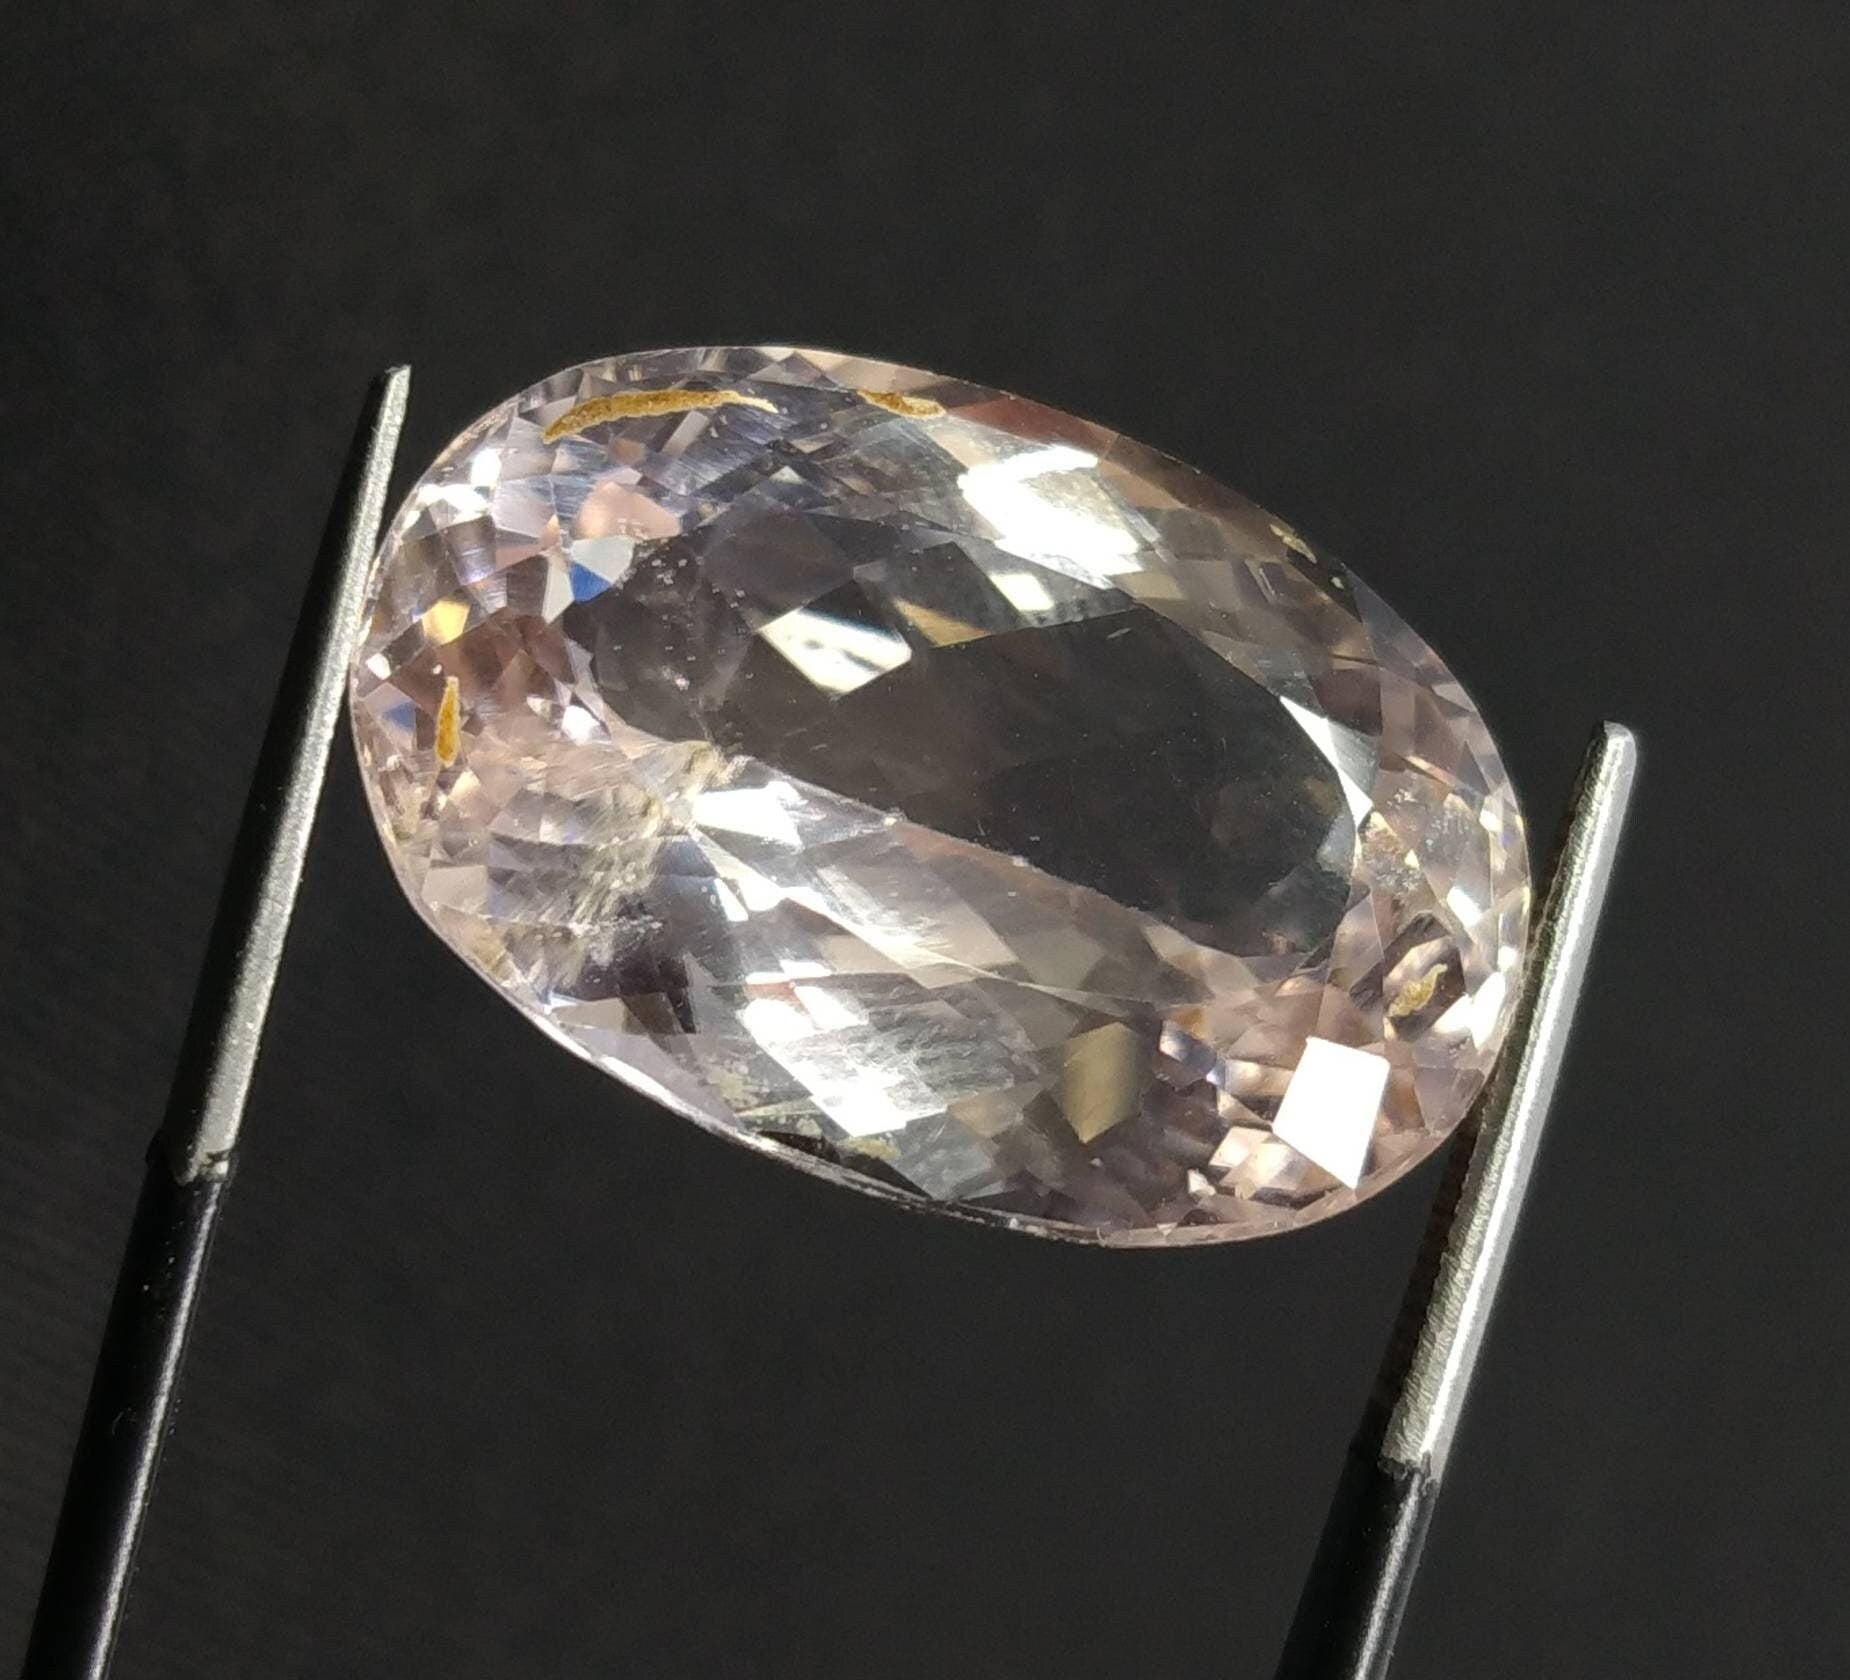 ARSAA GEMS AND MINERALSNatural fine quality beautiful 27 carats oval shape faceted kunzite gem - Premium  from ARSAA GEMS AND MINERALS - Just $54.00! Shop now at ARSAA GEMS AND MINERALS